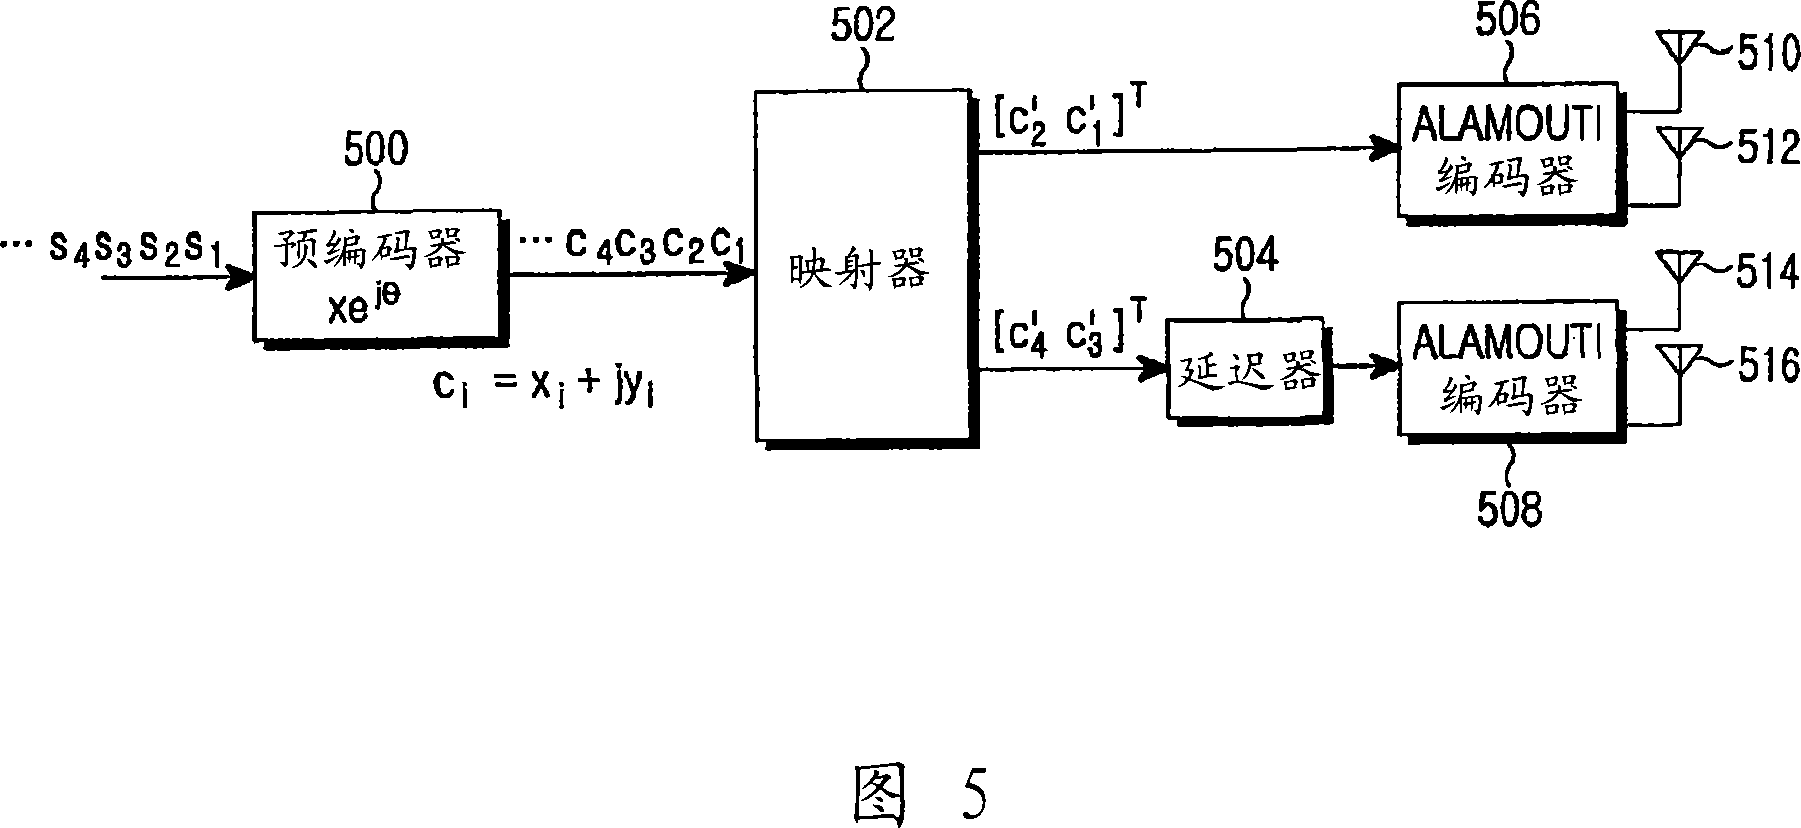 Apparatus and method for space-time-frequency block coding for increasing performance